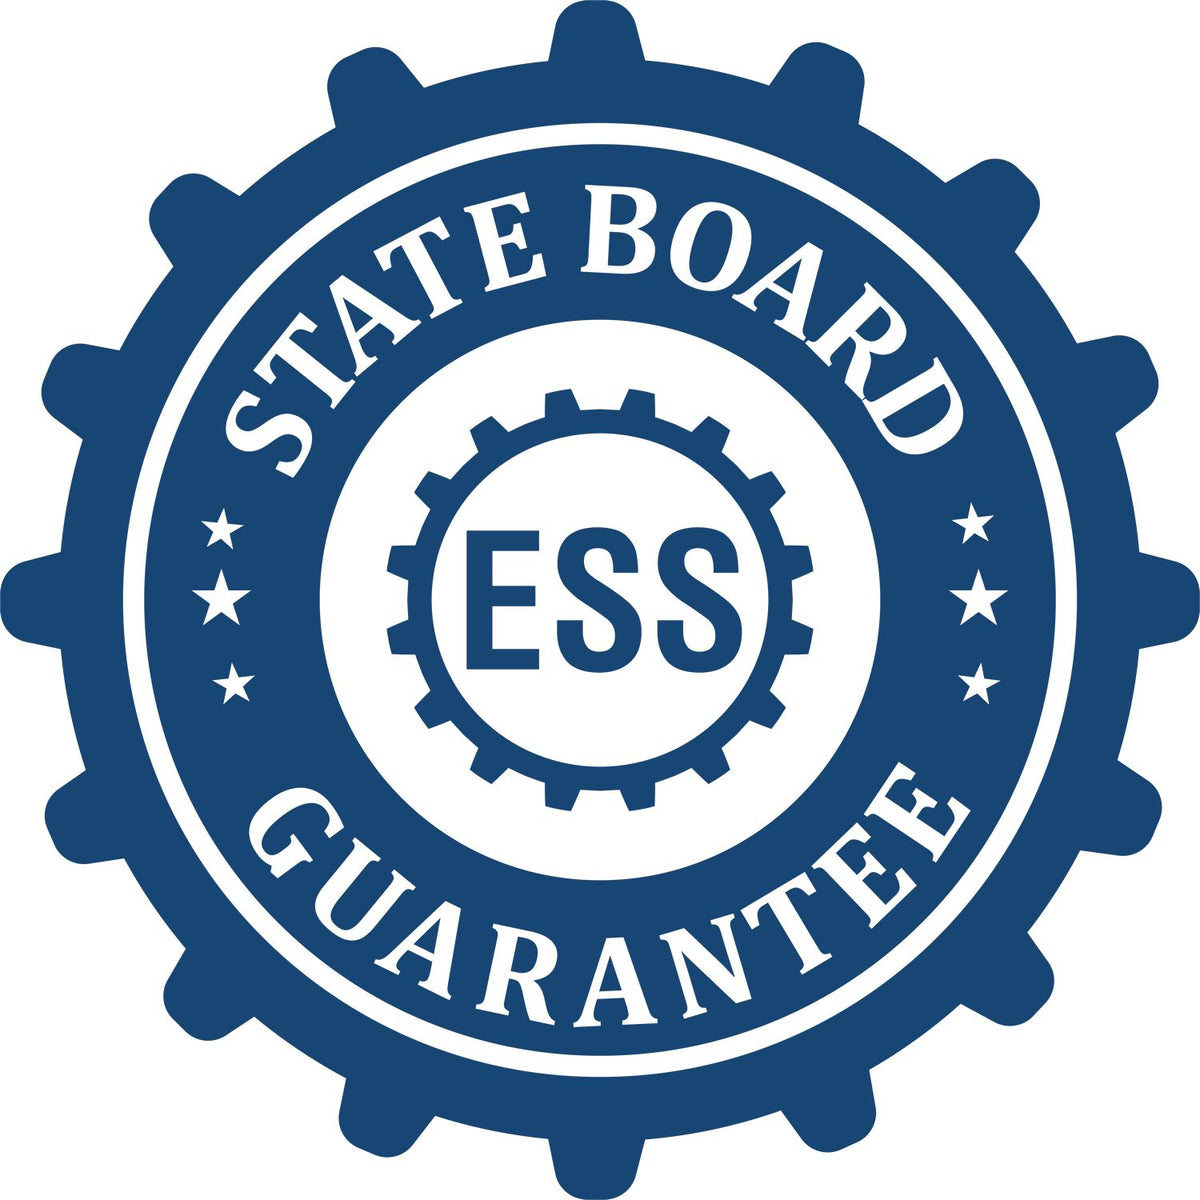 An emblem in a gear shape illustrating a state board guarantee for the Heavy Duty Cast Iron Guam Architect Embosser product.